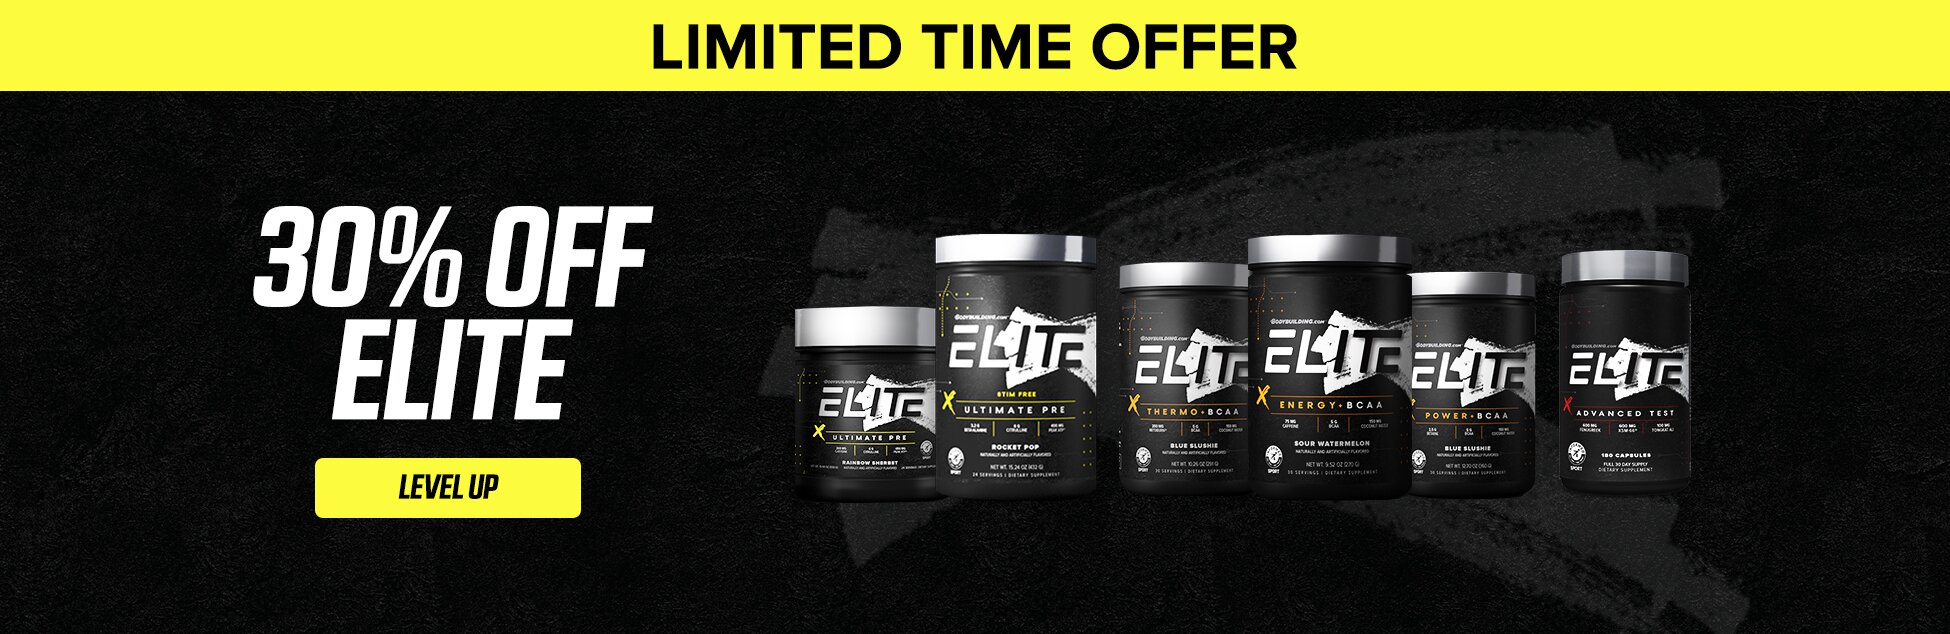 Reach new heights with Elite